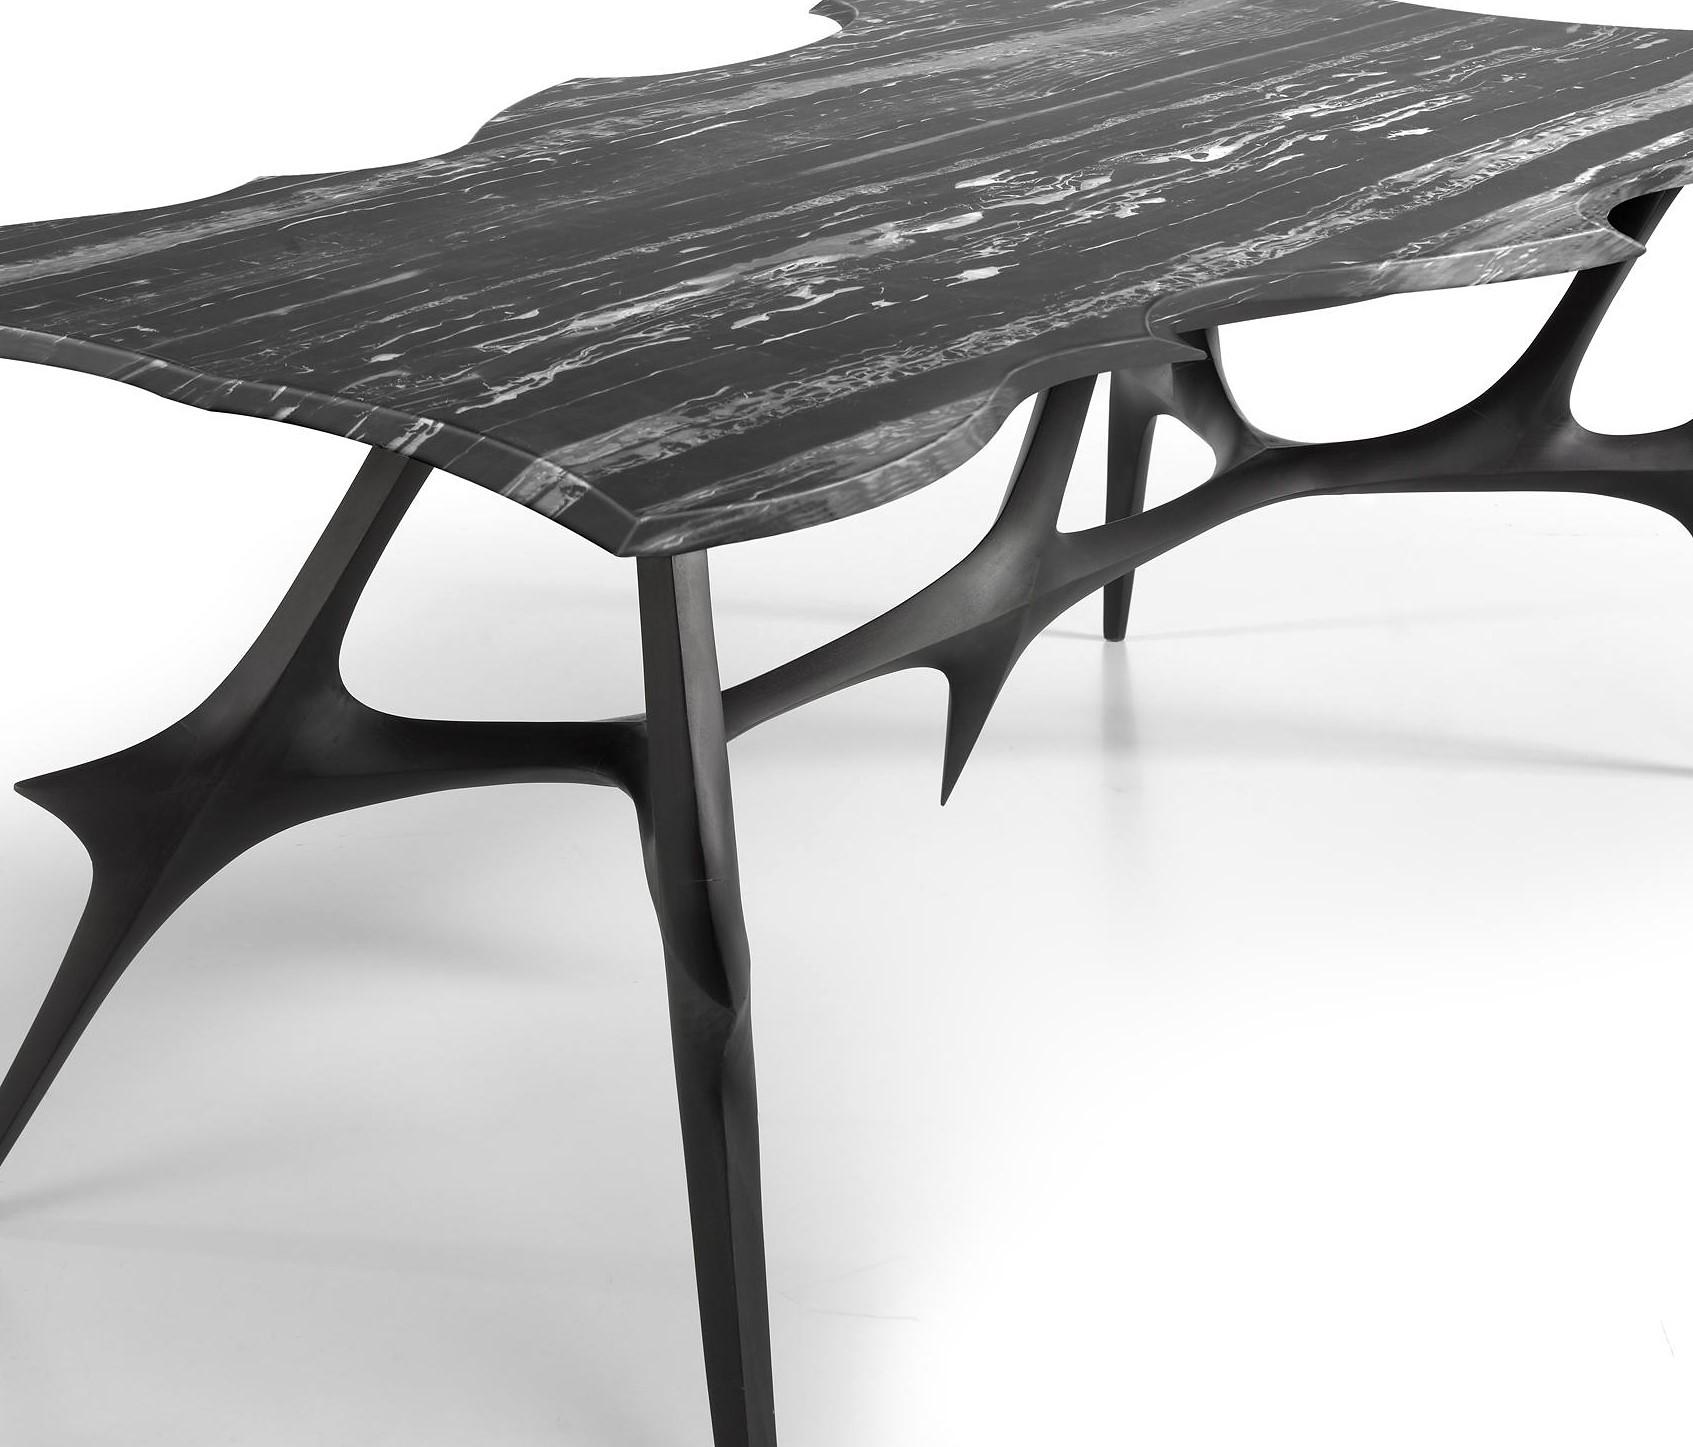 Limited Edition Dining Table Made To Order With American Walnut & Marble 1